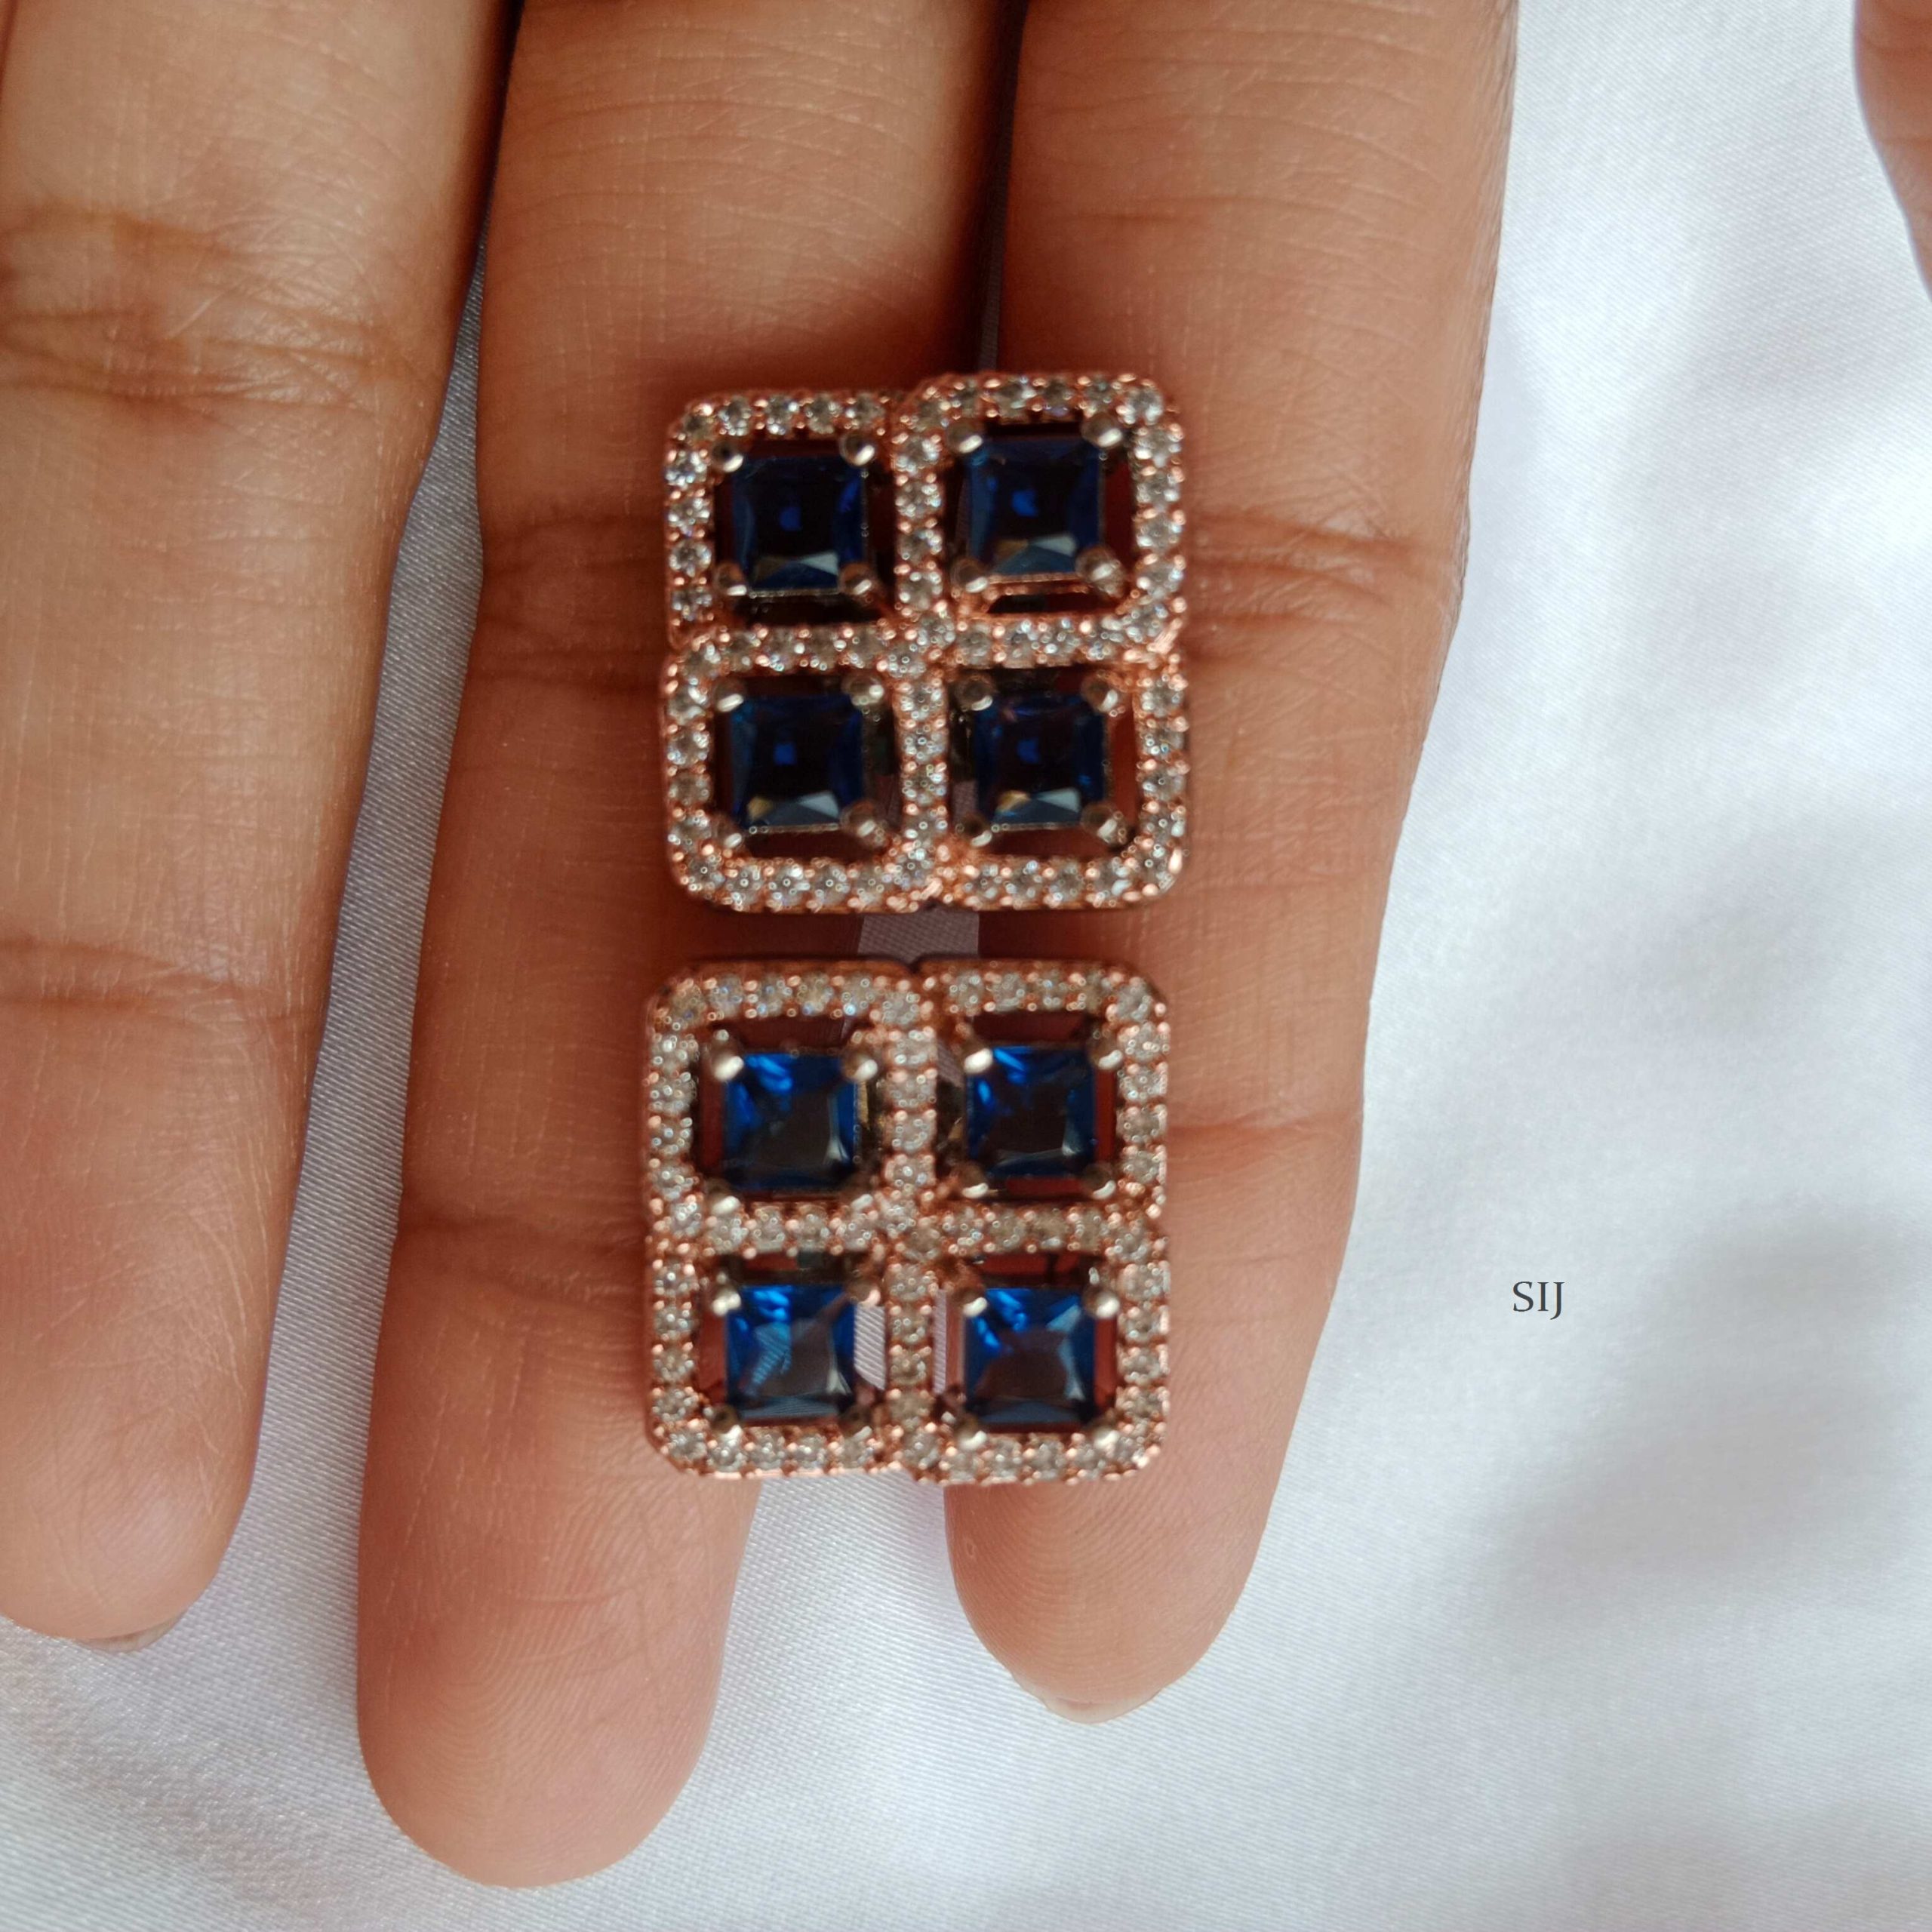 Imitation Red / Blue AD Stones Square Earrings